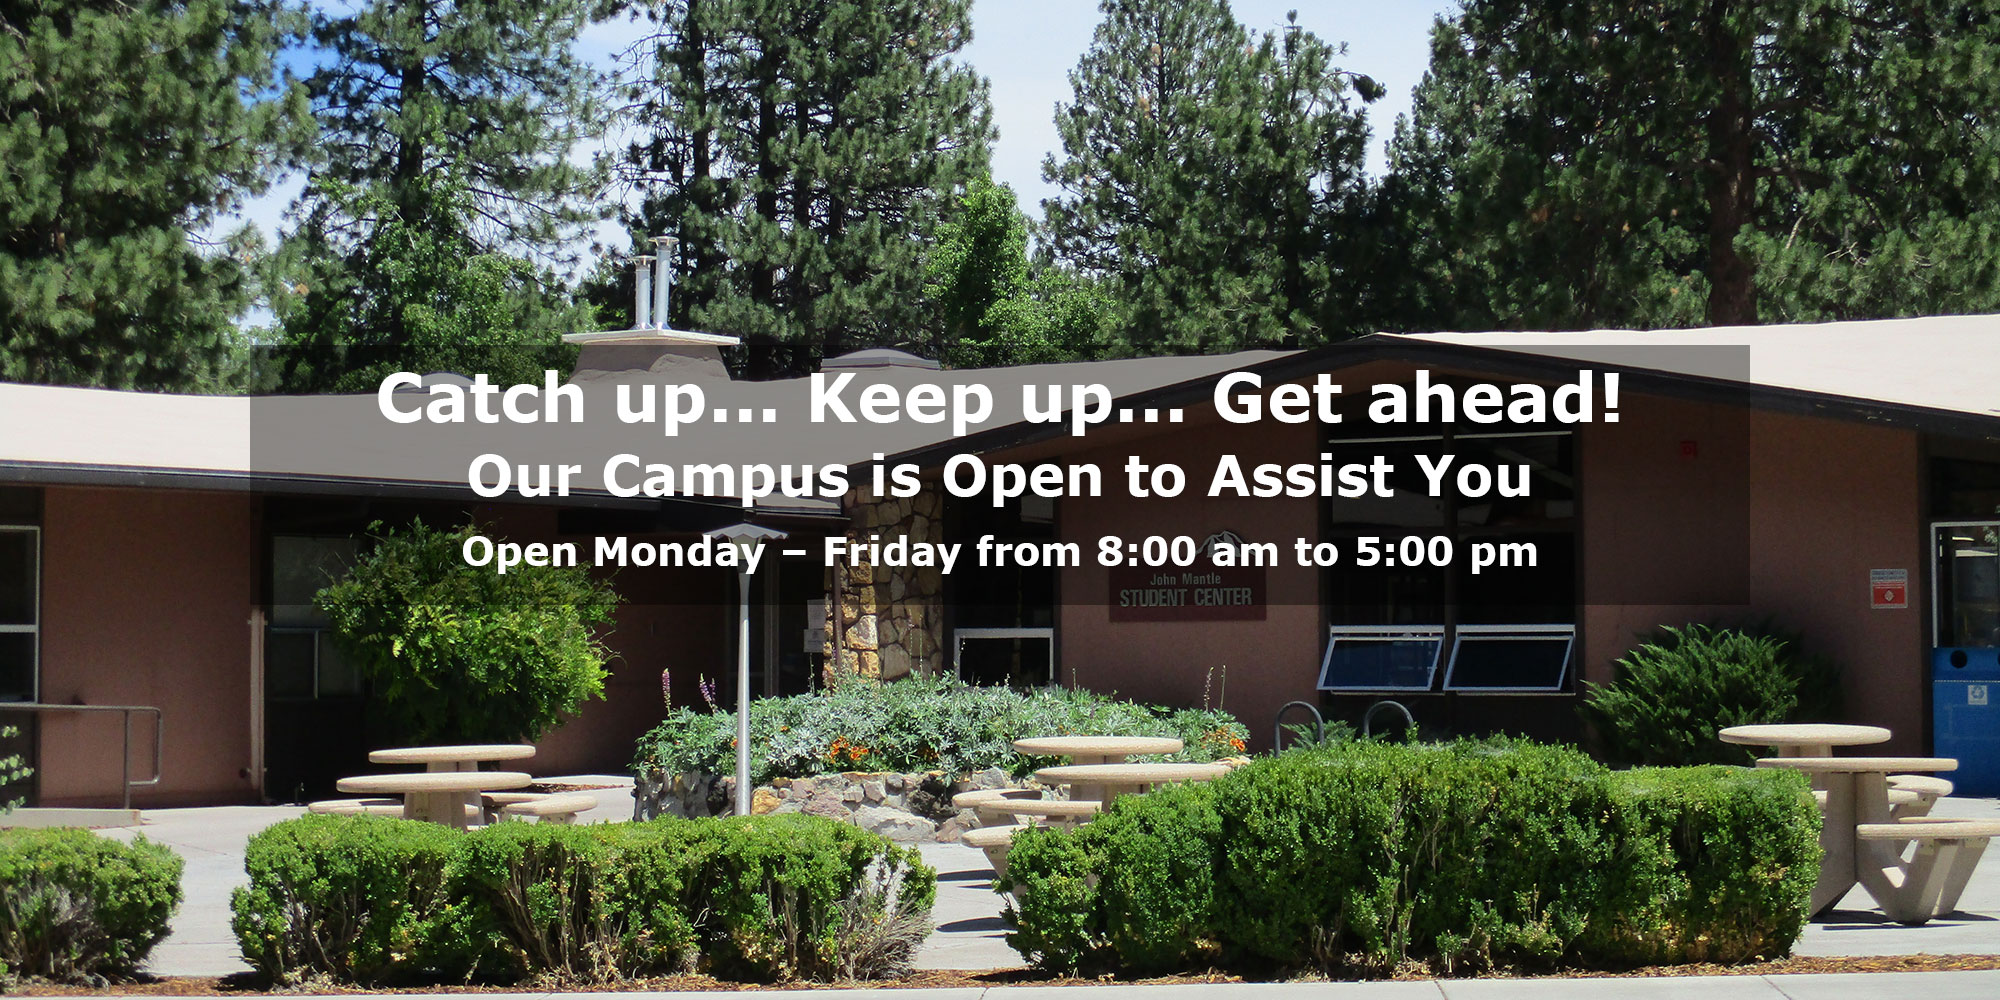 Our Campus is Open to Assist You! Our main campus in Weed is open and ready to assist students get ready for the Fall semester. Open Monday – Friday from 8:00 am to 5:00 pm.